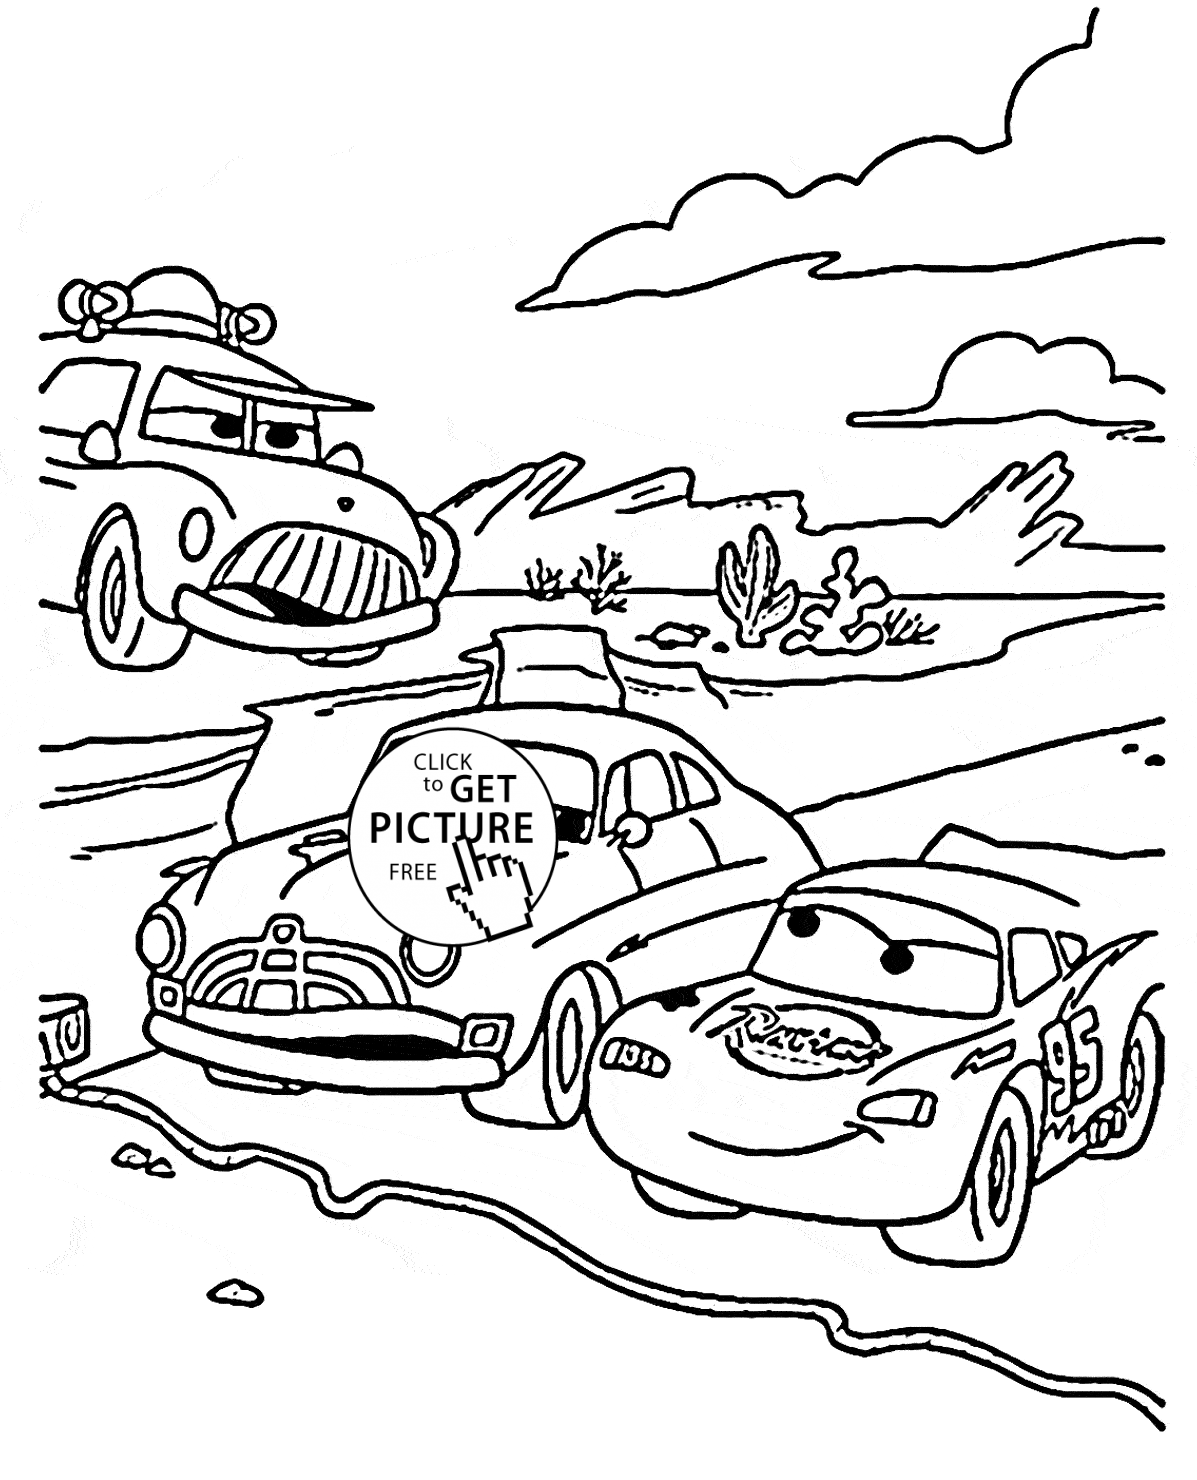 Download Race Car And Race Track Coloring Pages - Coloring Home